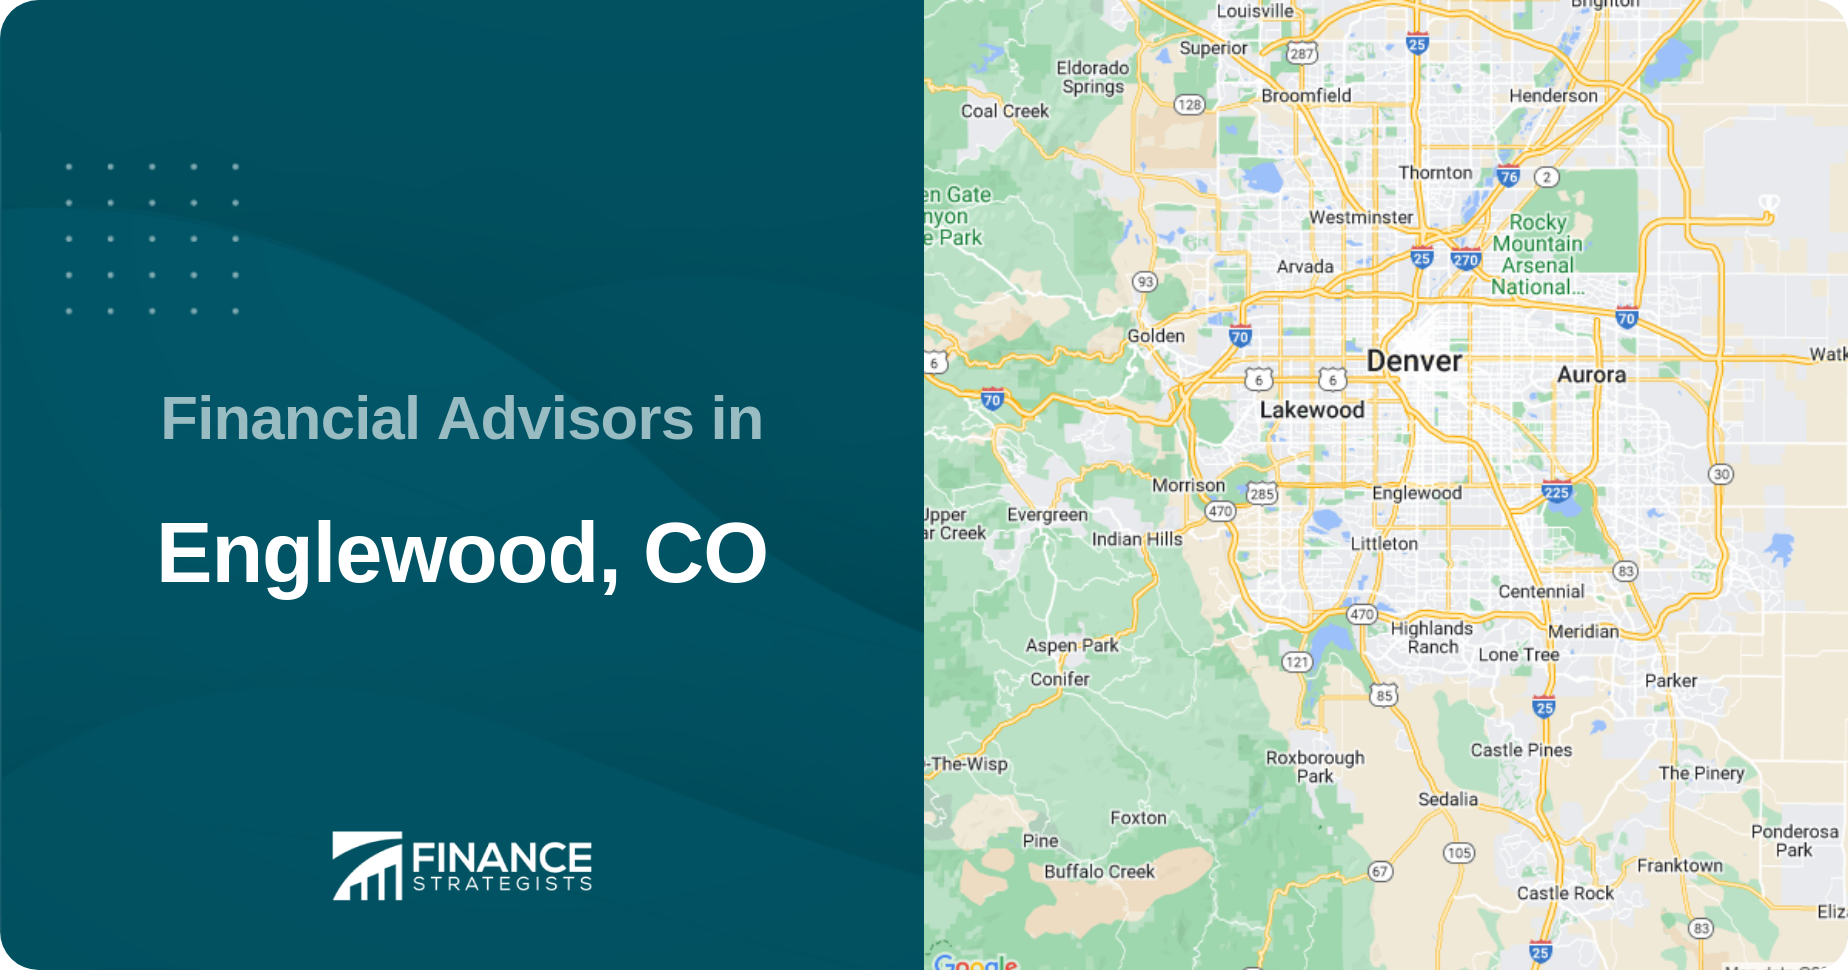 Financial Advisors in Englewood, CO